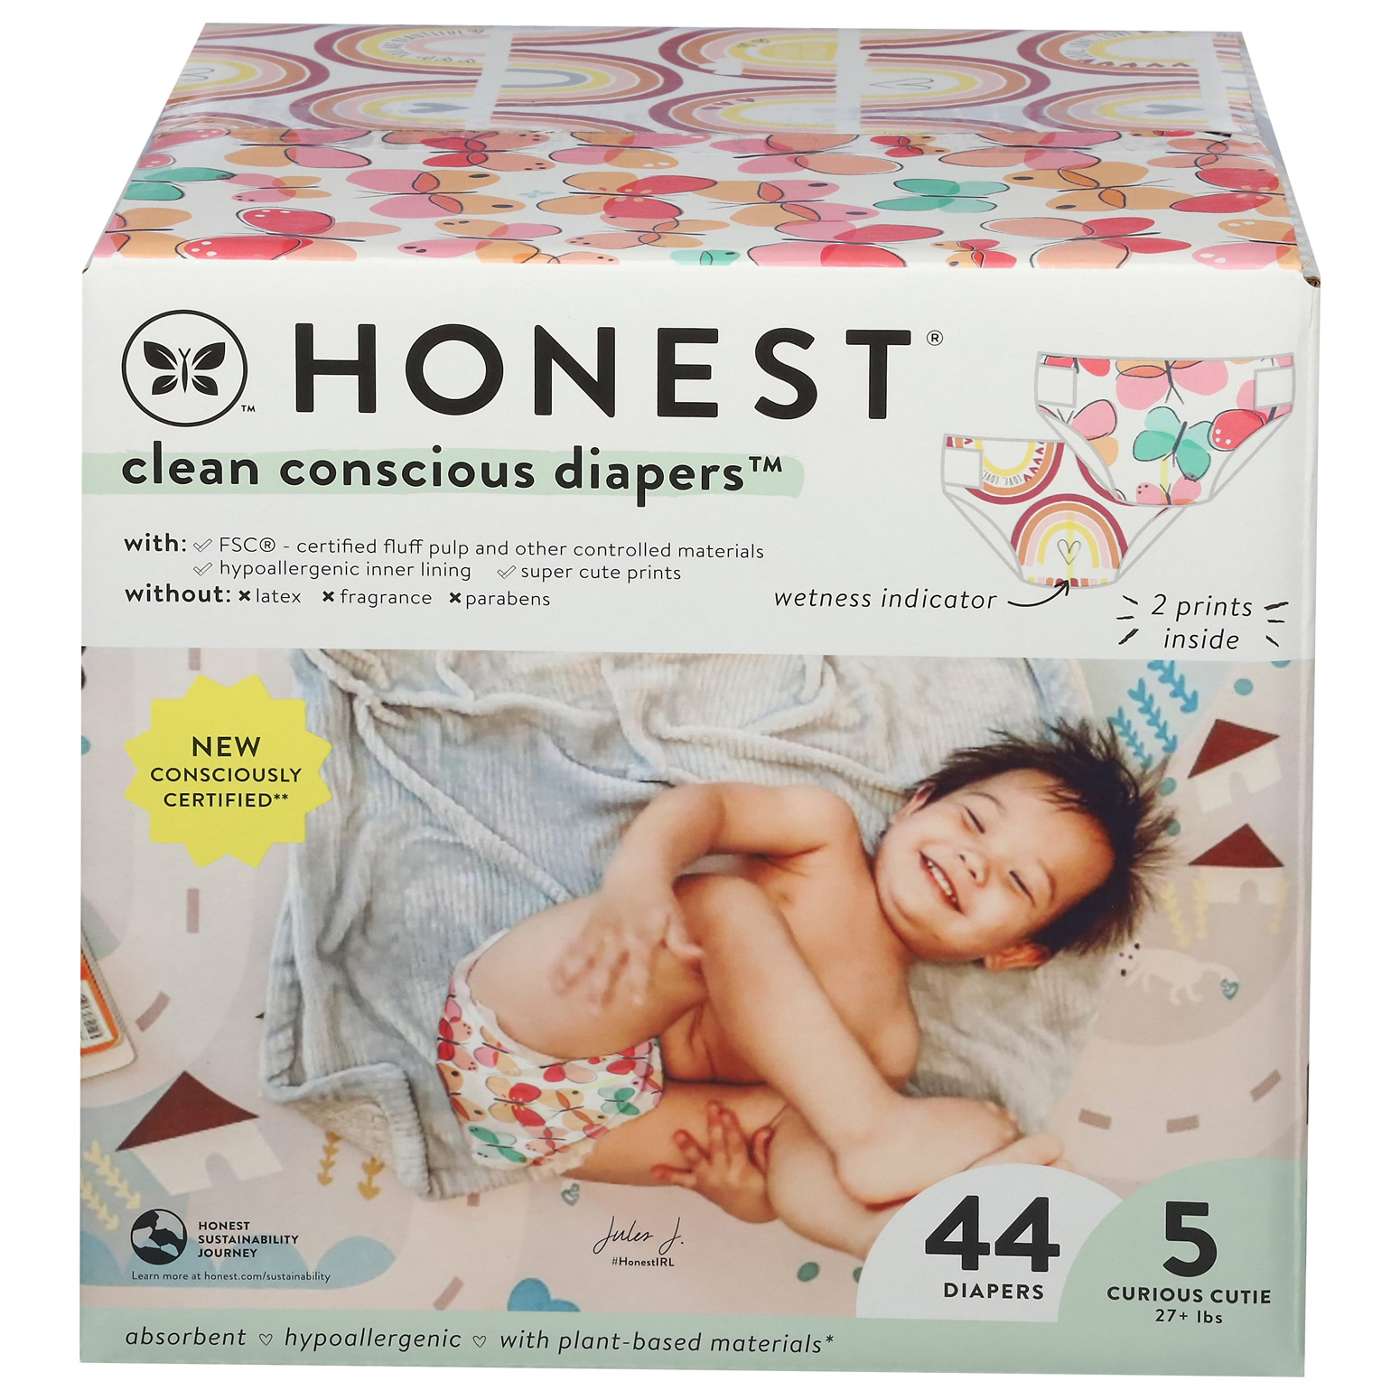 The Honest Company Clean Conscious Diapers Club Box - Size 5, 2 Print Pack; image 1 of 3